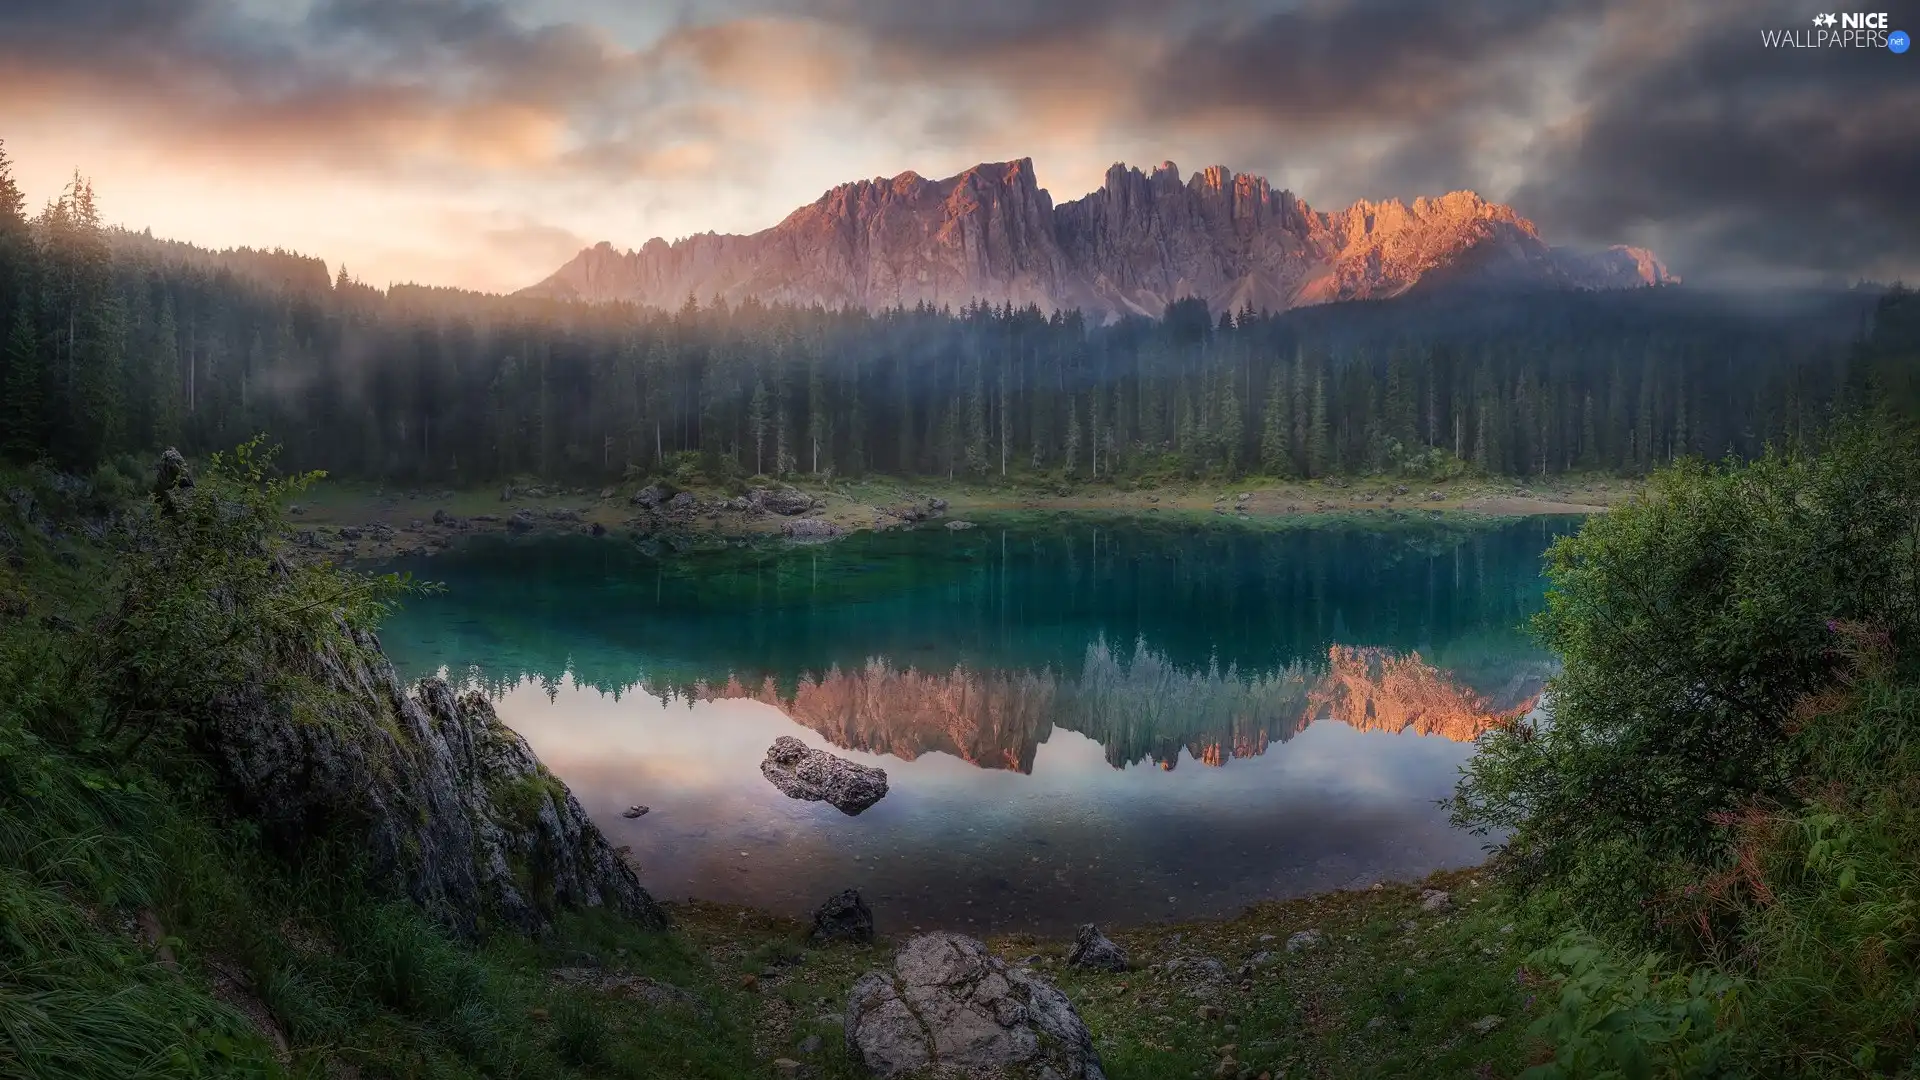 Dolomites, lake, trees, forest, clouds, Italy, South Tyrol, Mountains, Lago di Carezza, reflection, viewes